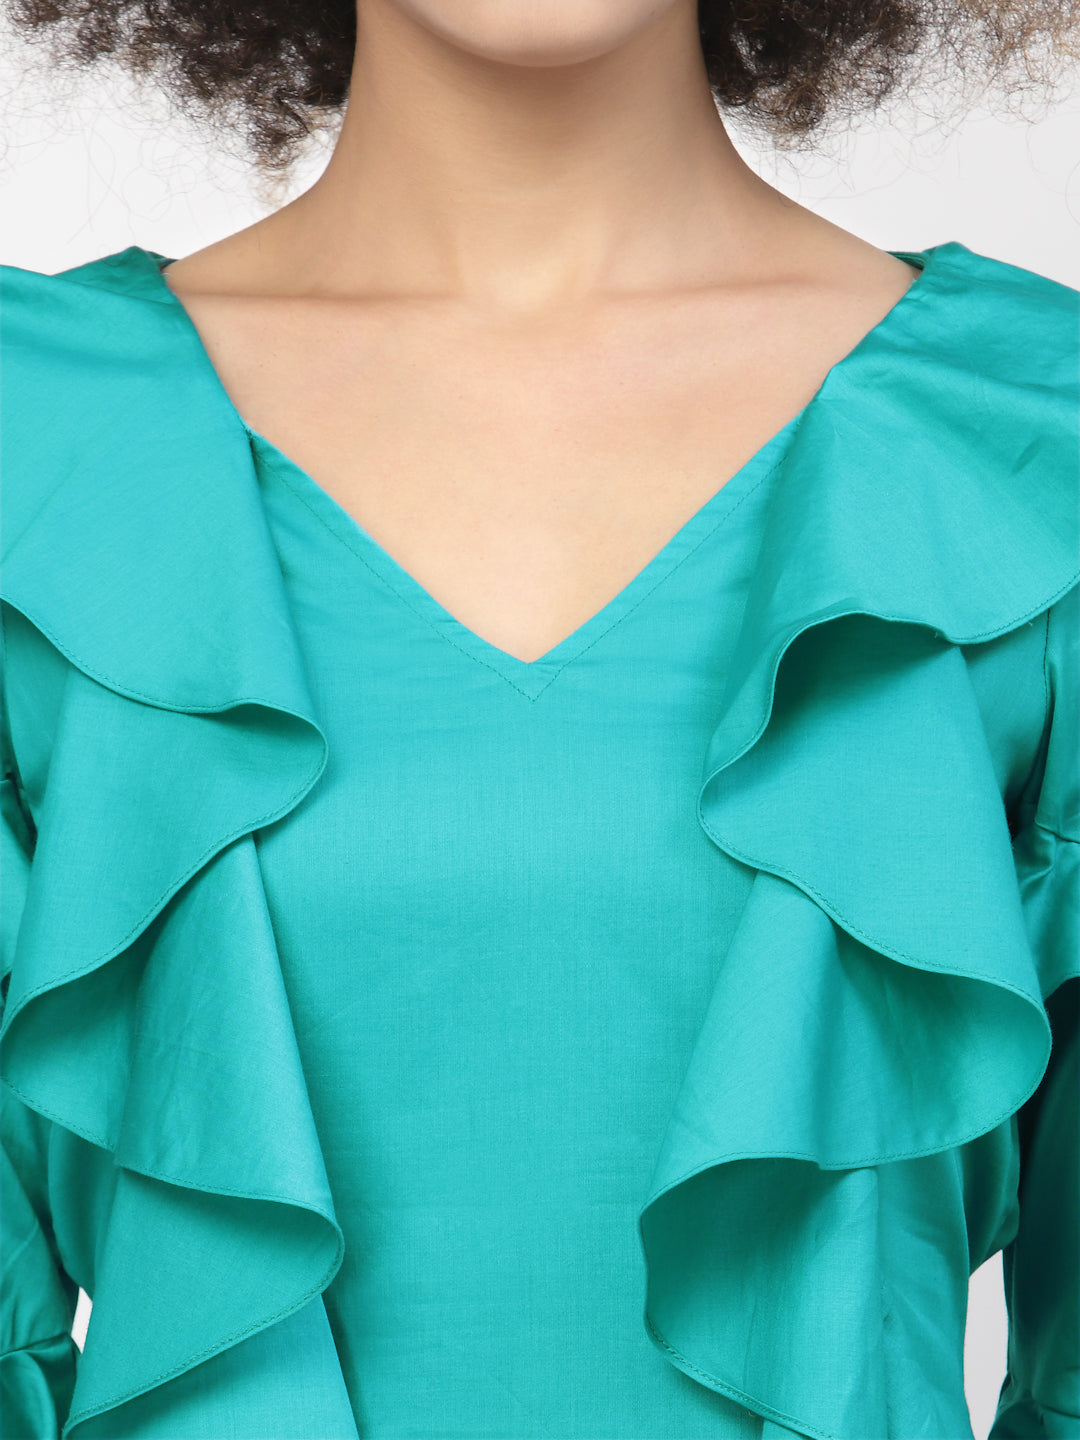 Turquoise Cotton Dress With Frill Sleeves & Tie Belt